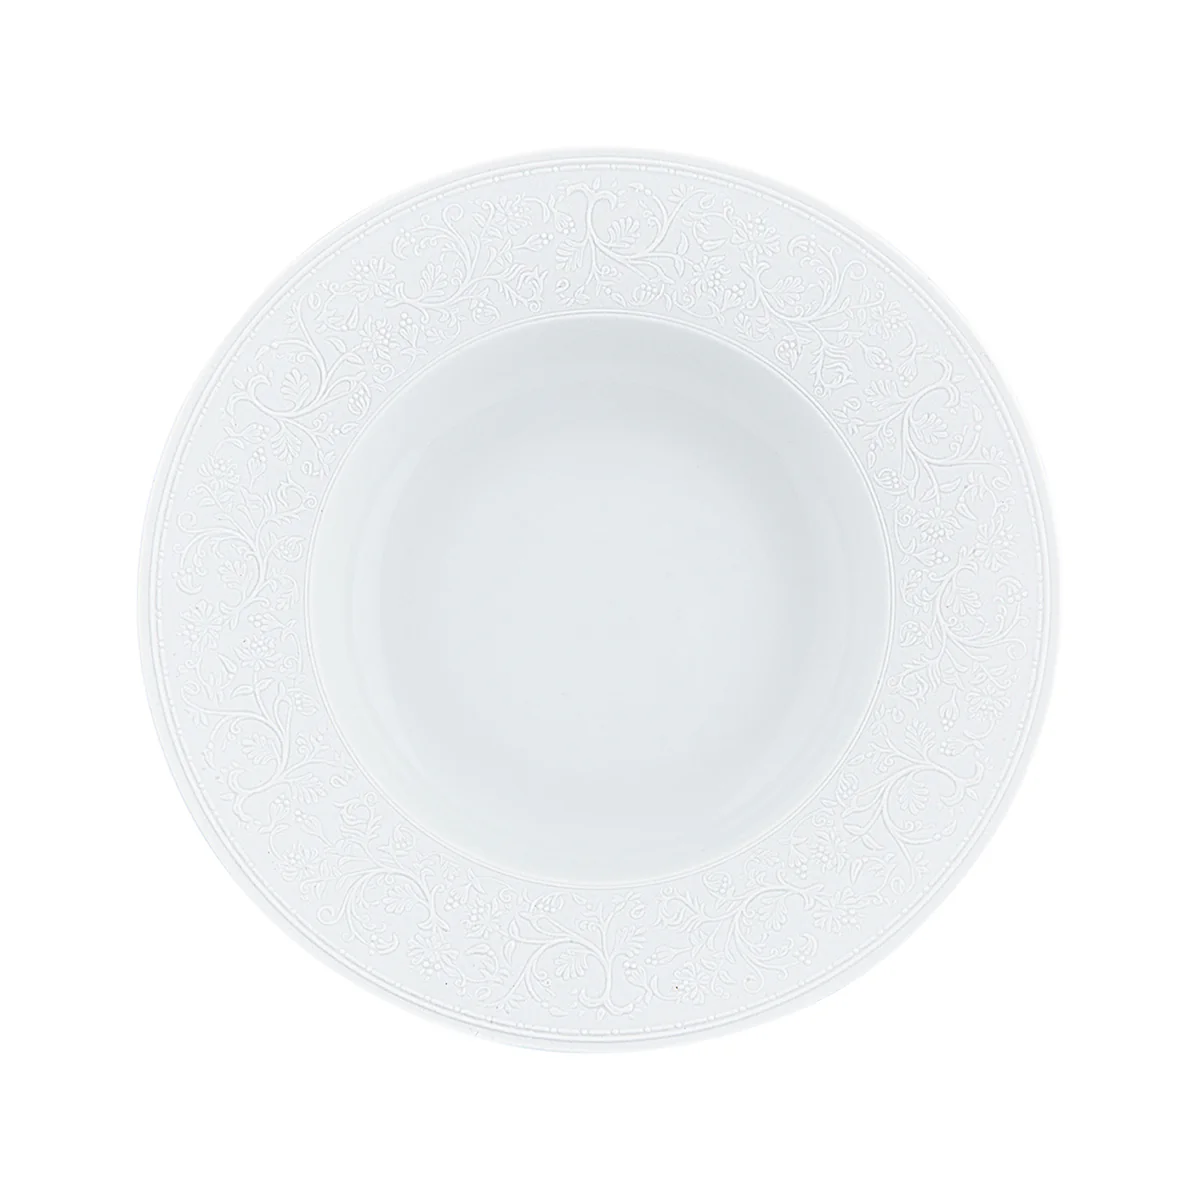 SWAN - MM wing soup plate